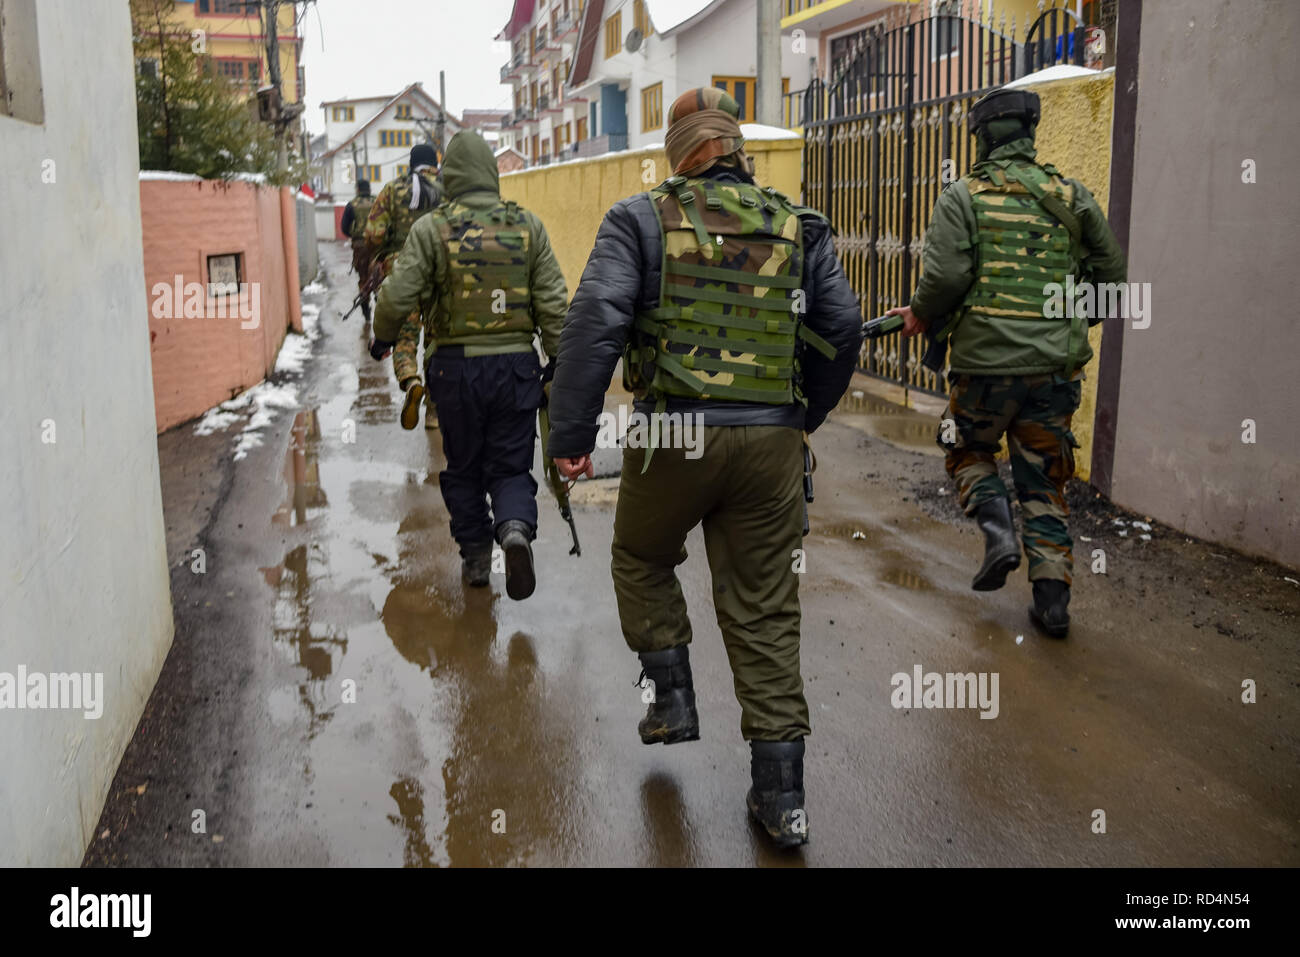 Indian army-men are seen patrolling the site of explosion in Srinagar. According to Police, at least five members of government forces were injured on Thursday in a grenade explosion blamed on rebels fighting against Indian rule in Indian-controlled Kashmir's main city. Stock Photo